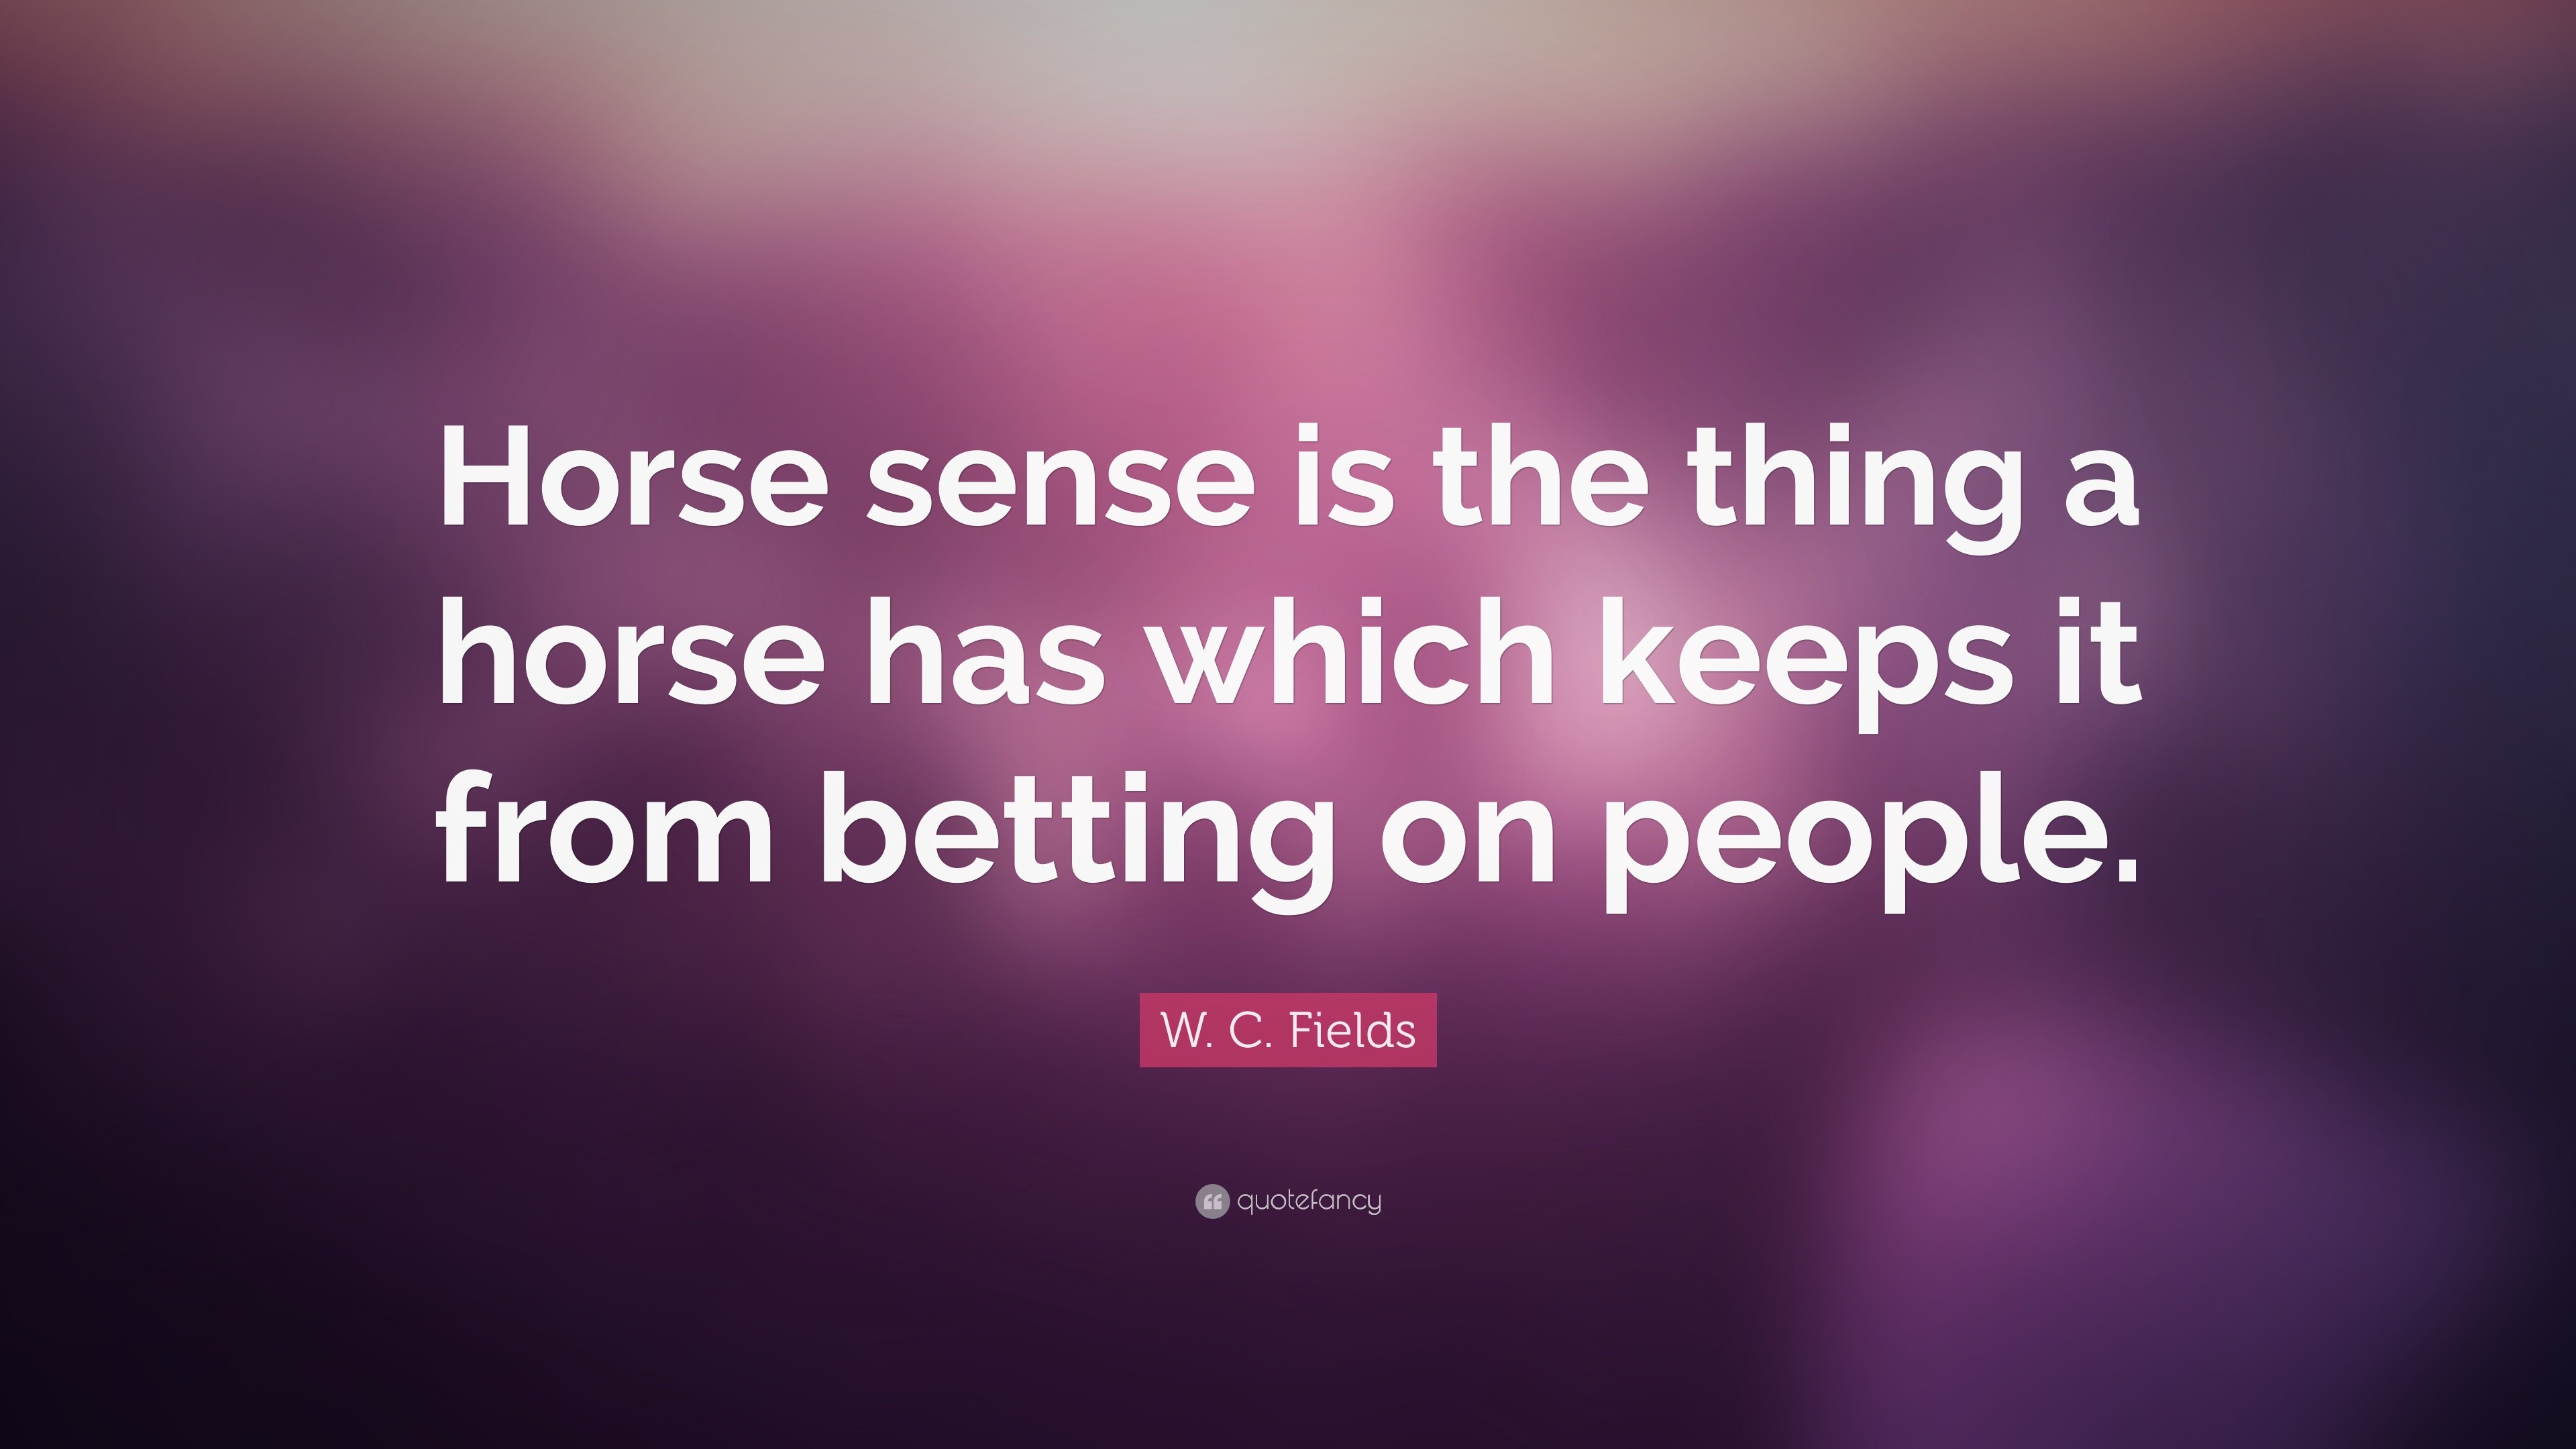 w-c-fields-quote-horse-sense-is-the-thing-a-horse-has-which-keeps